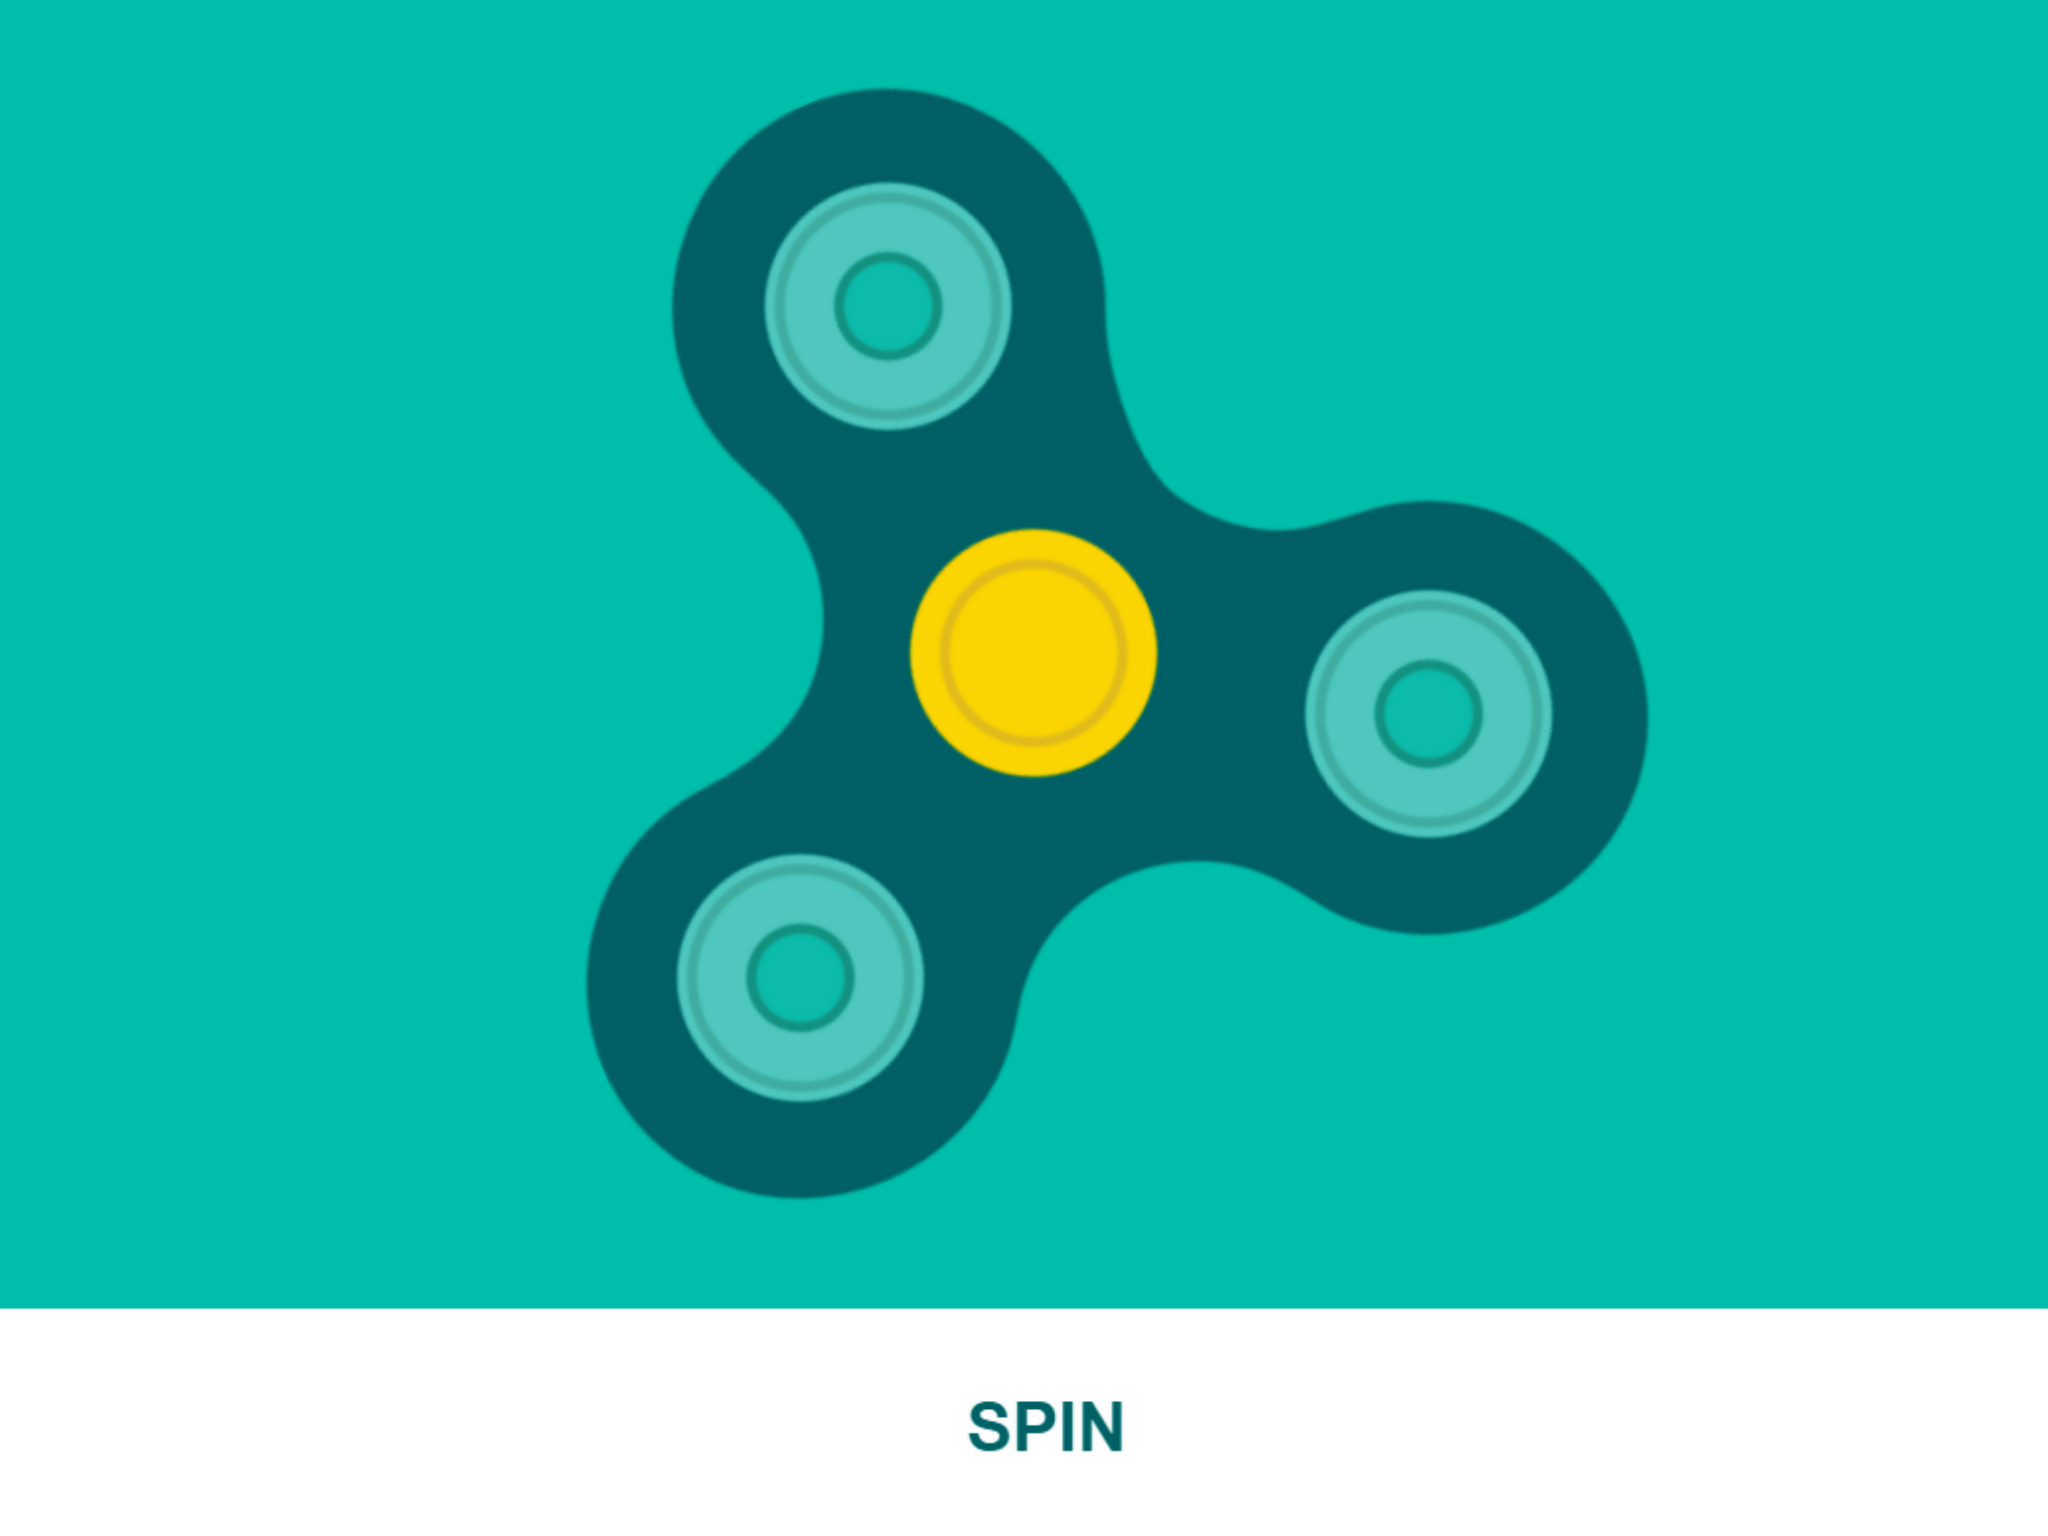 Fidget Spin - Figet Toy Spinne – Apps on Google Play